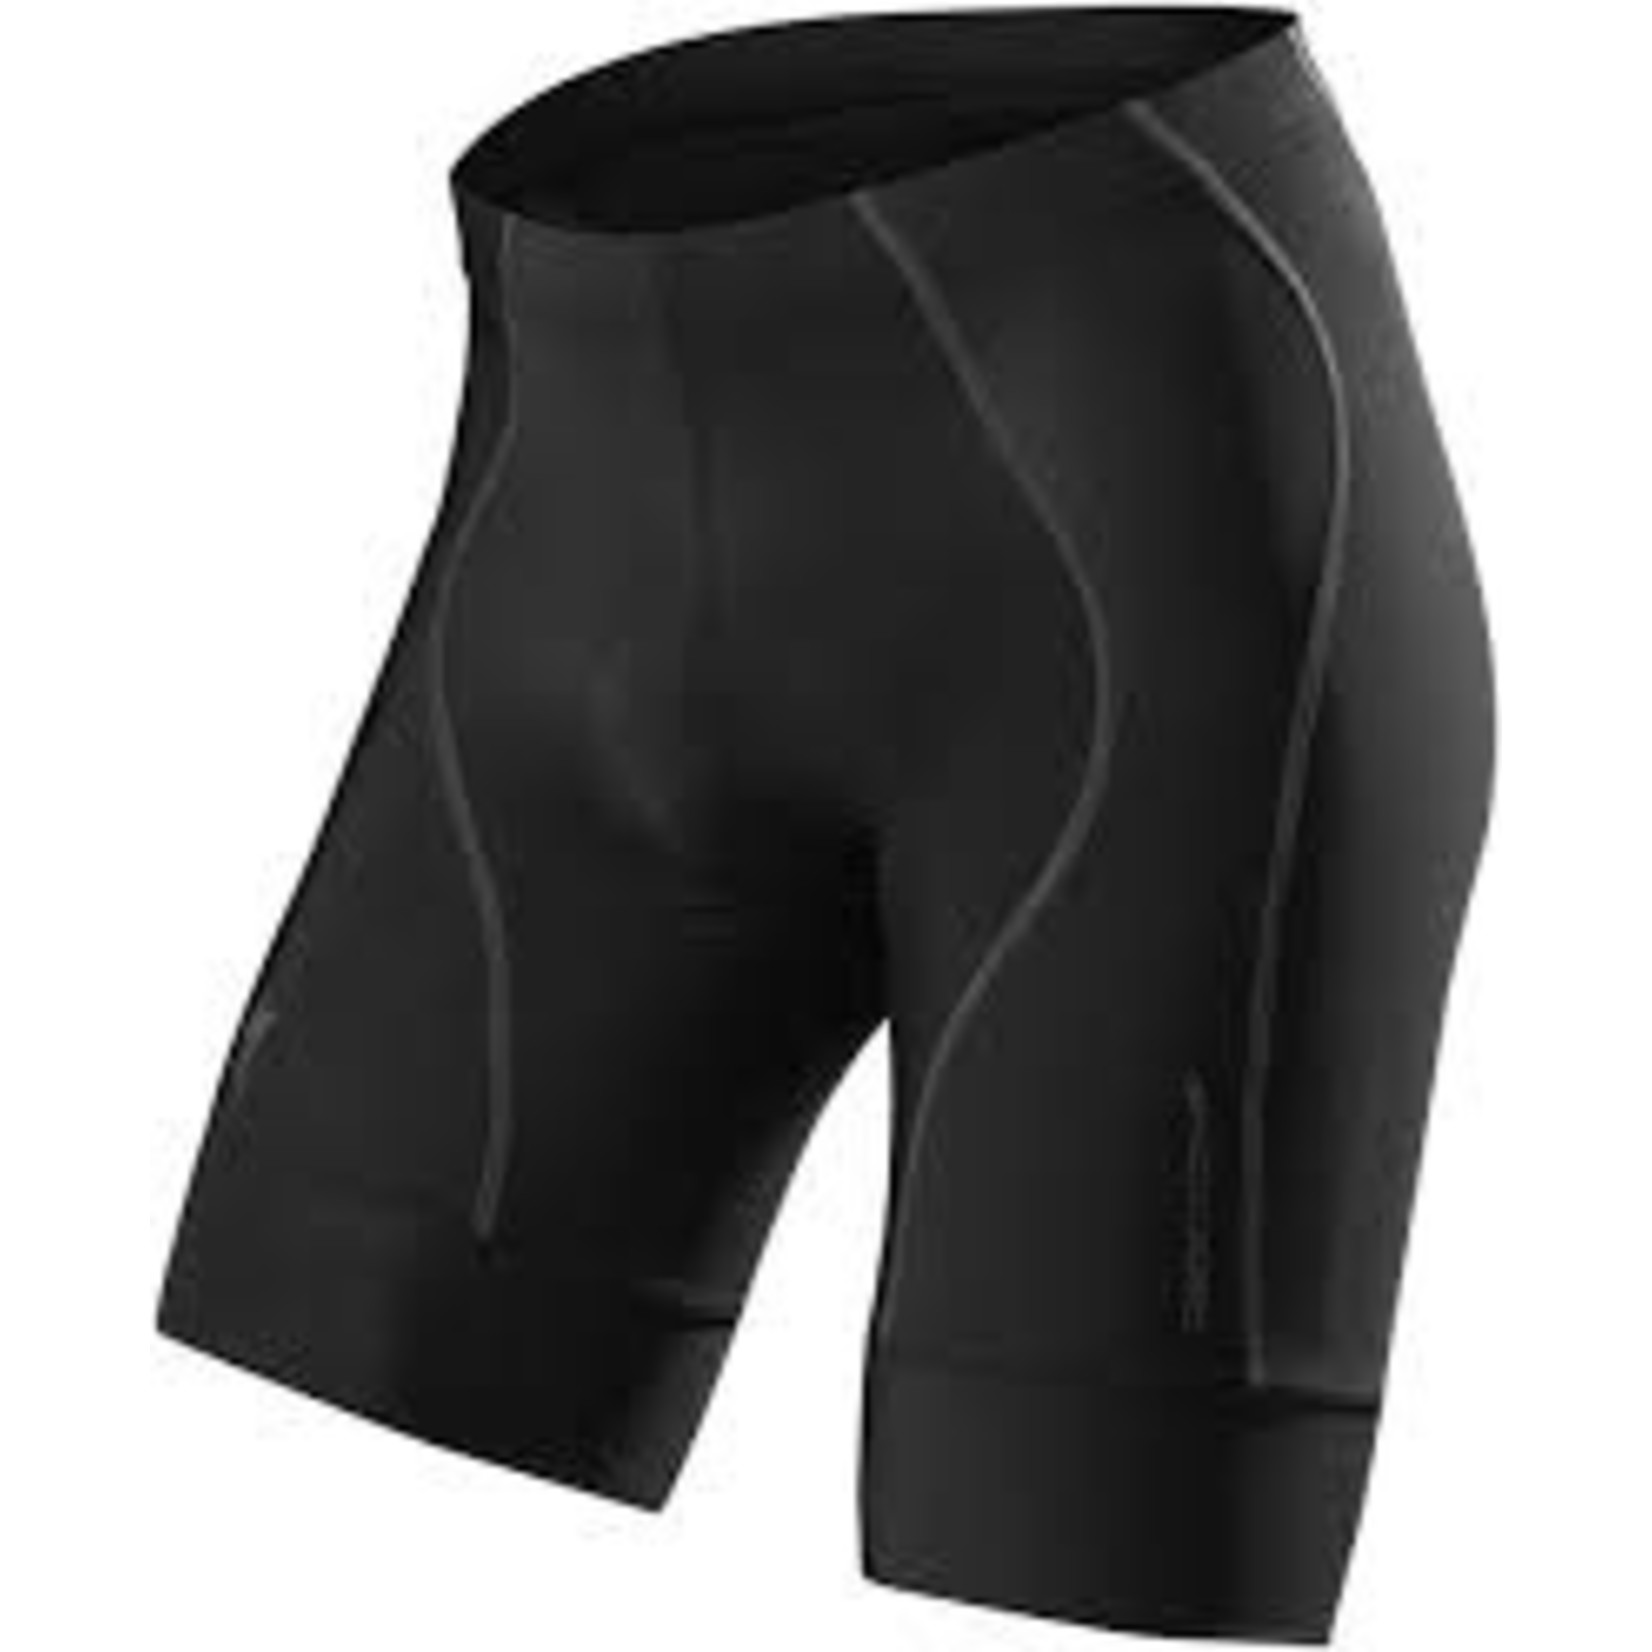 Specialized RBX Comp Short Black - Women's Small